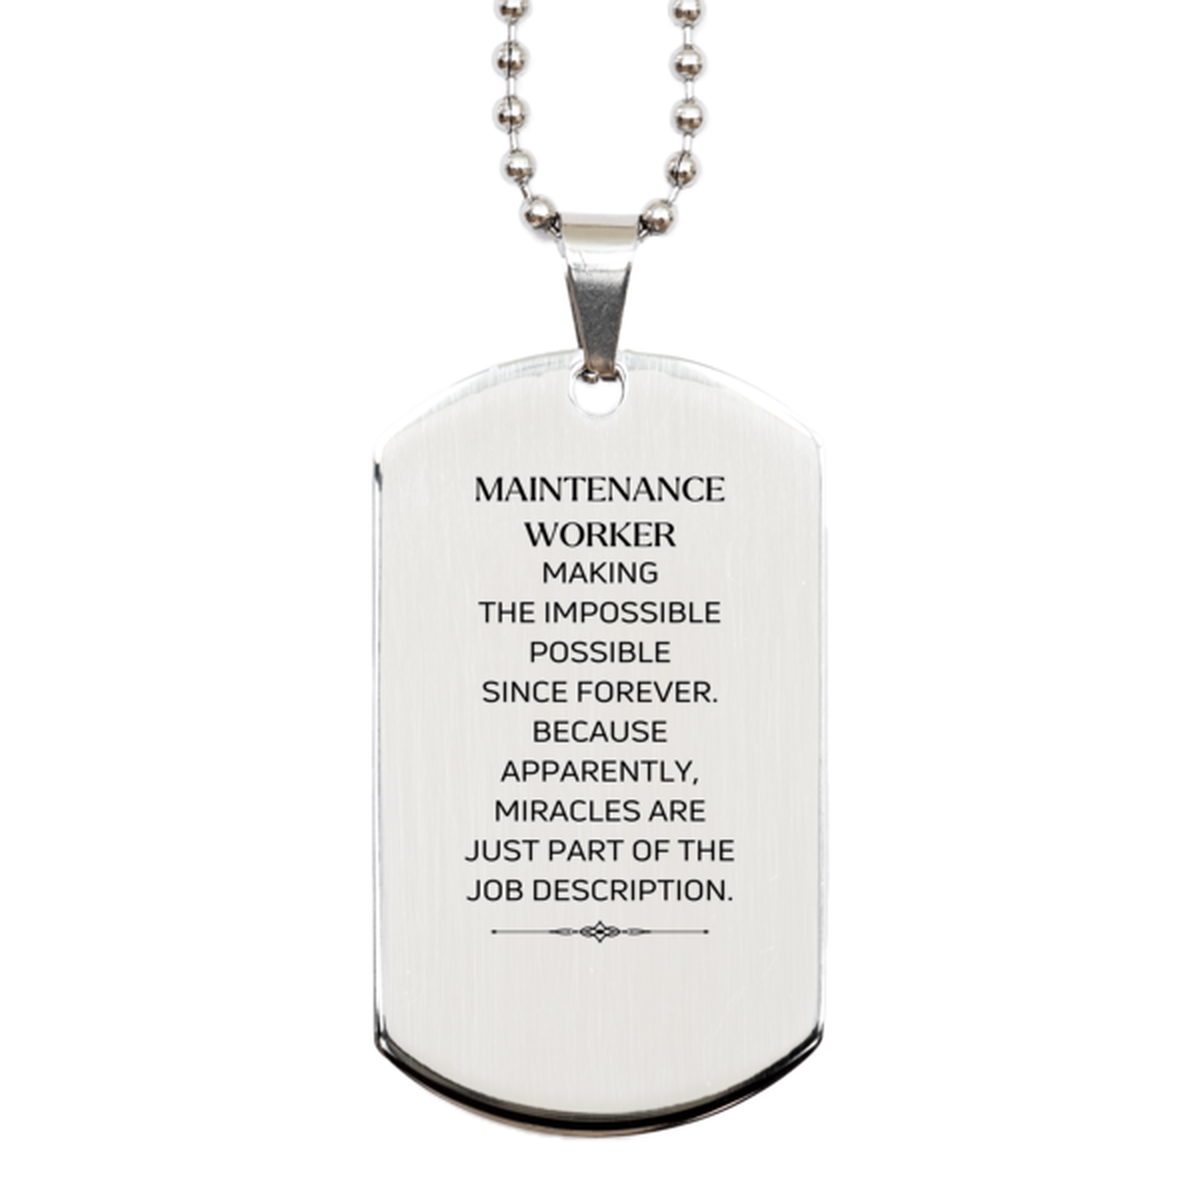 Funny Maintenance Worker Gifts, Miracles are just part of the job description, Inspirational Birthday Silver Dog Tag For Maintenance Worker, Men, Women, Coworkers, Friends, Boss